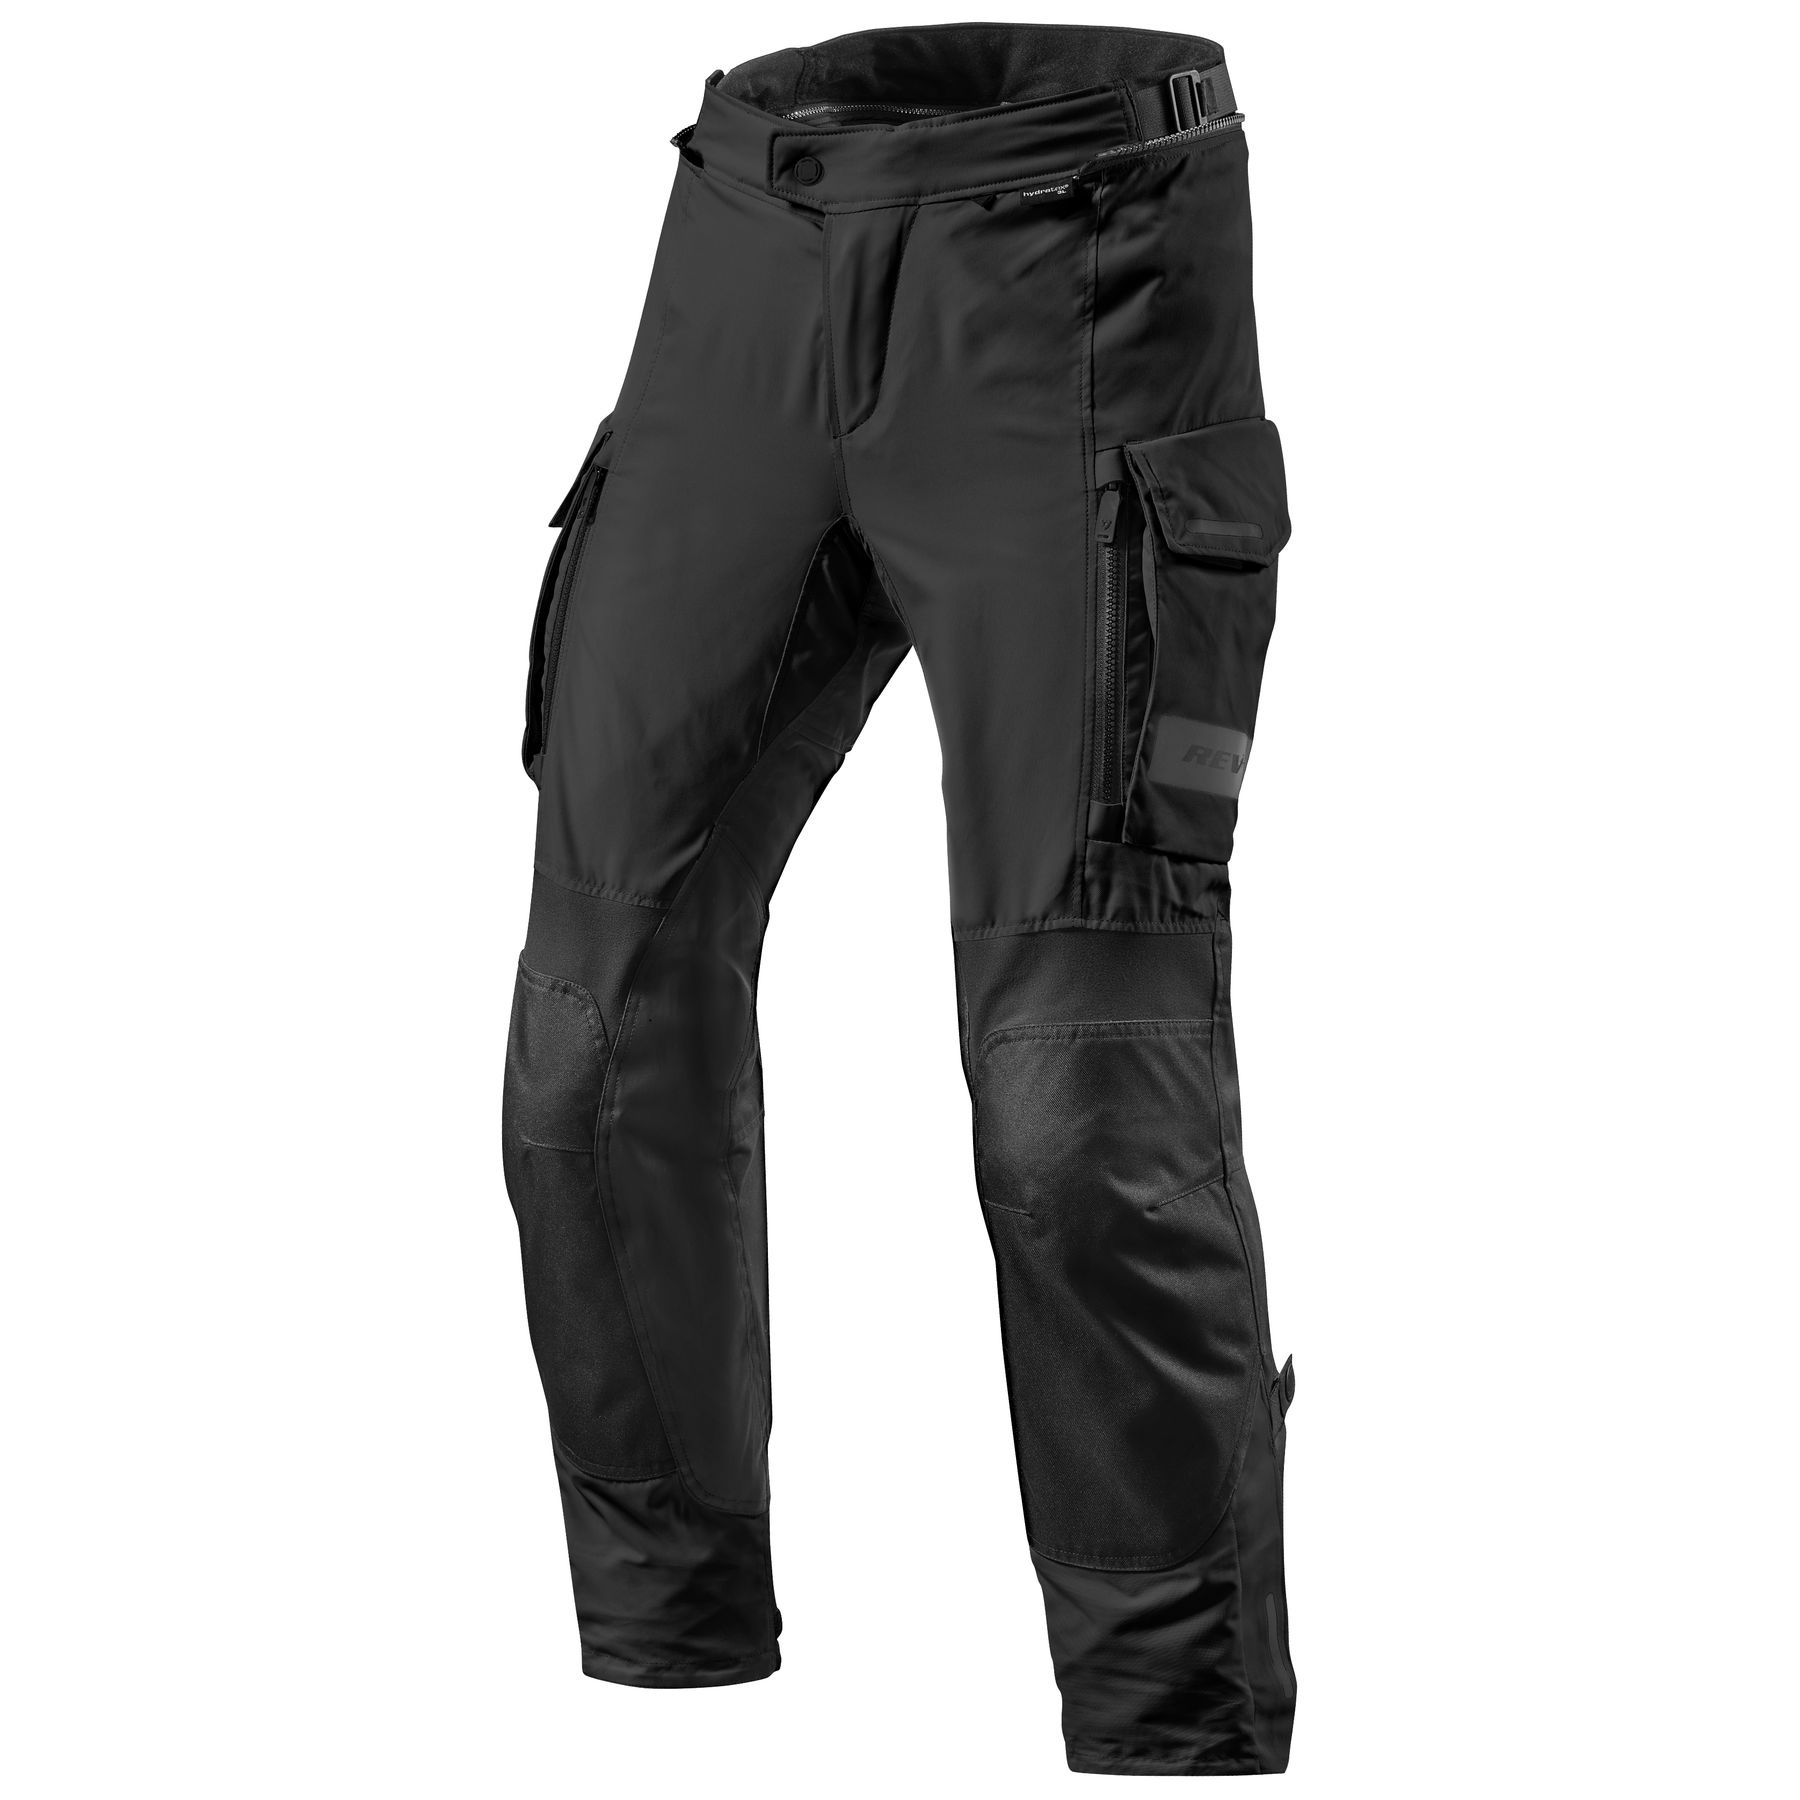 Cotton Motorcycle Riding Pants Mens Racing Jeans CE Protect Gear Casual Trousers